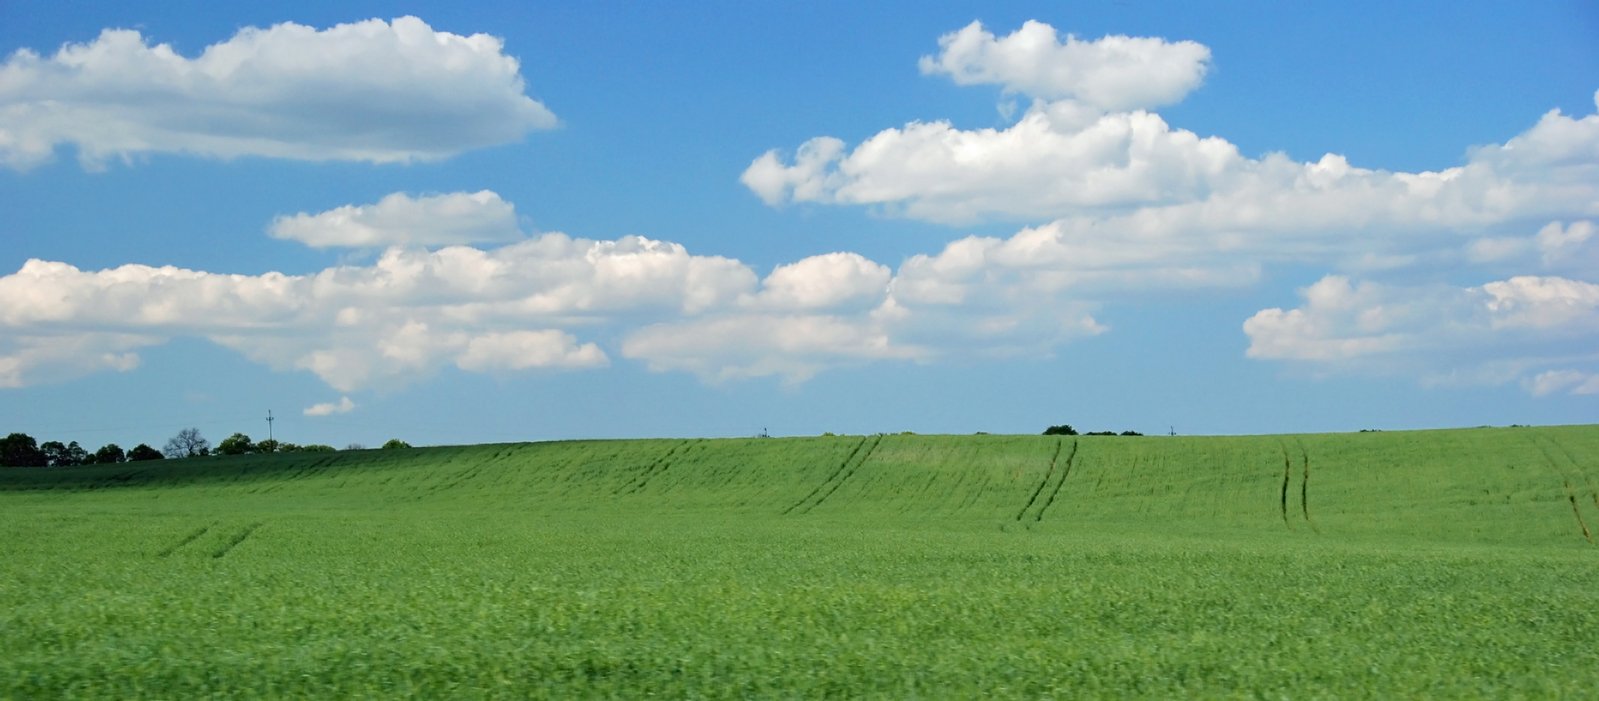 a green field with clouds overhead and a tree in the distance